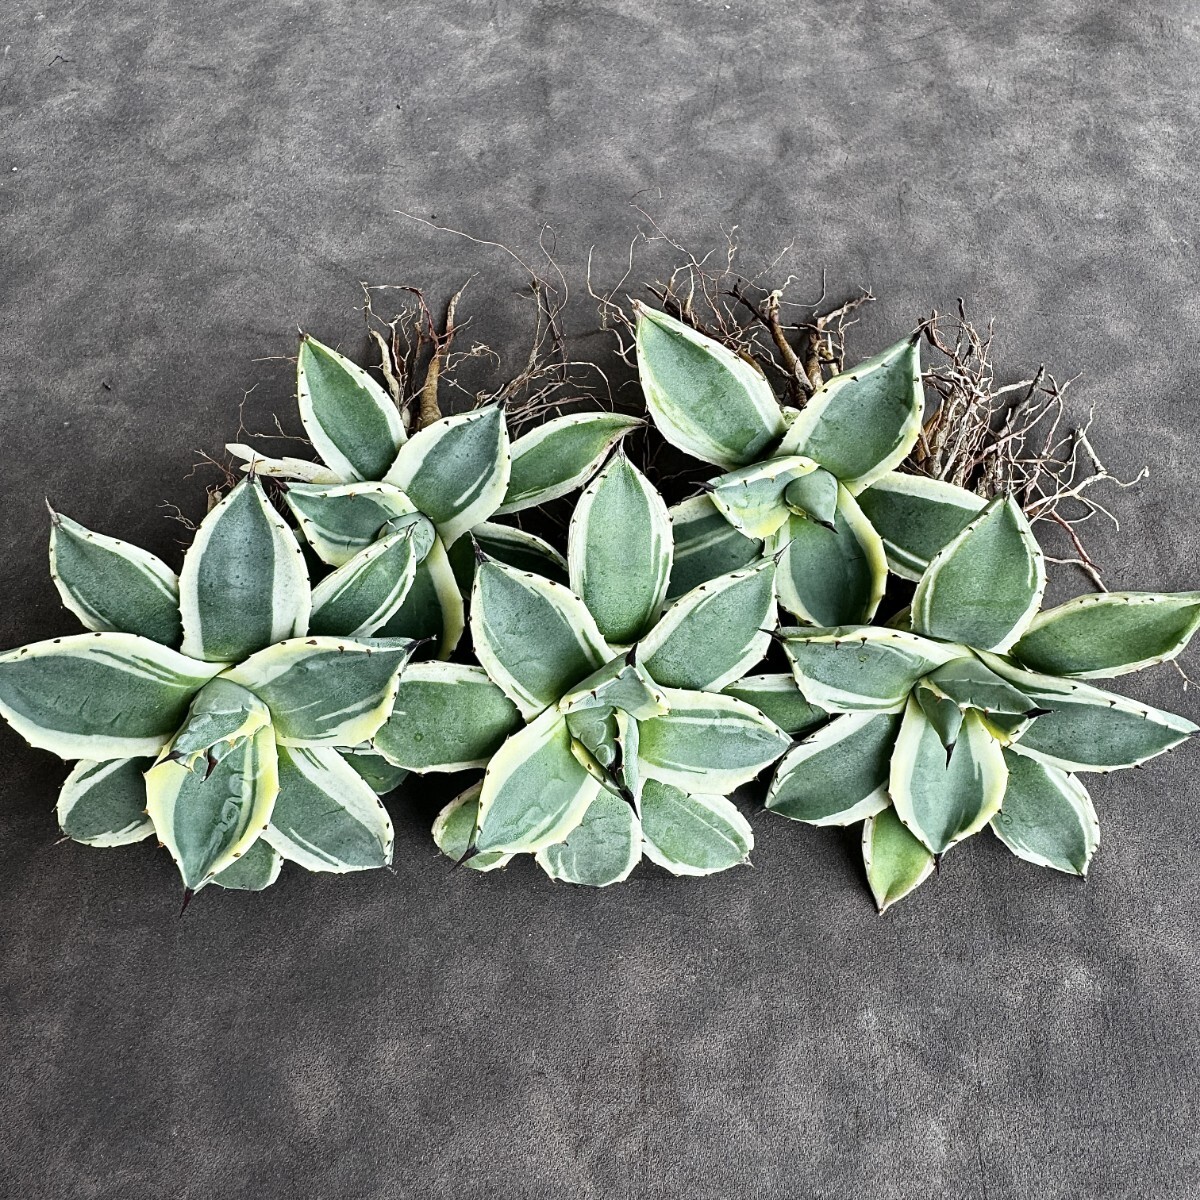 [Lj_plants] H99 agave a pra na-ta cream spike me Rico . yellow . wheel . ultimate beautiful finest quality stock 5 stock including in a package 